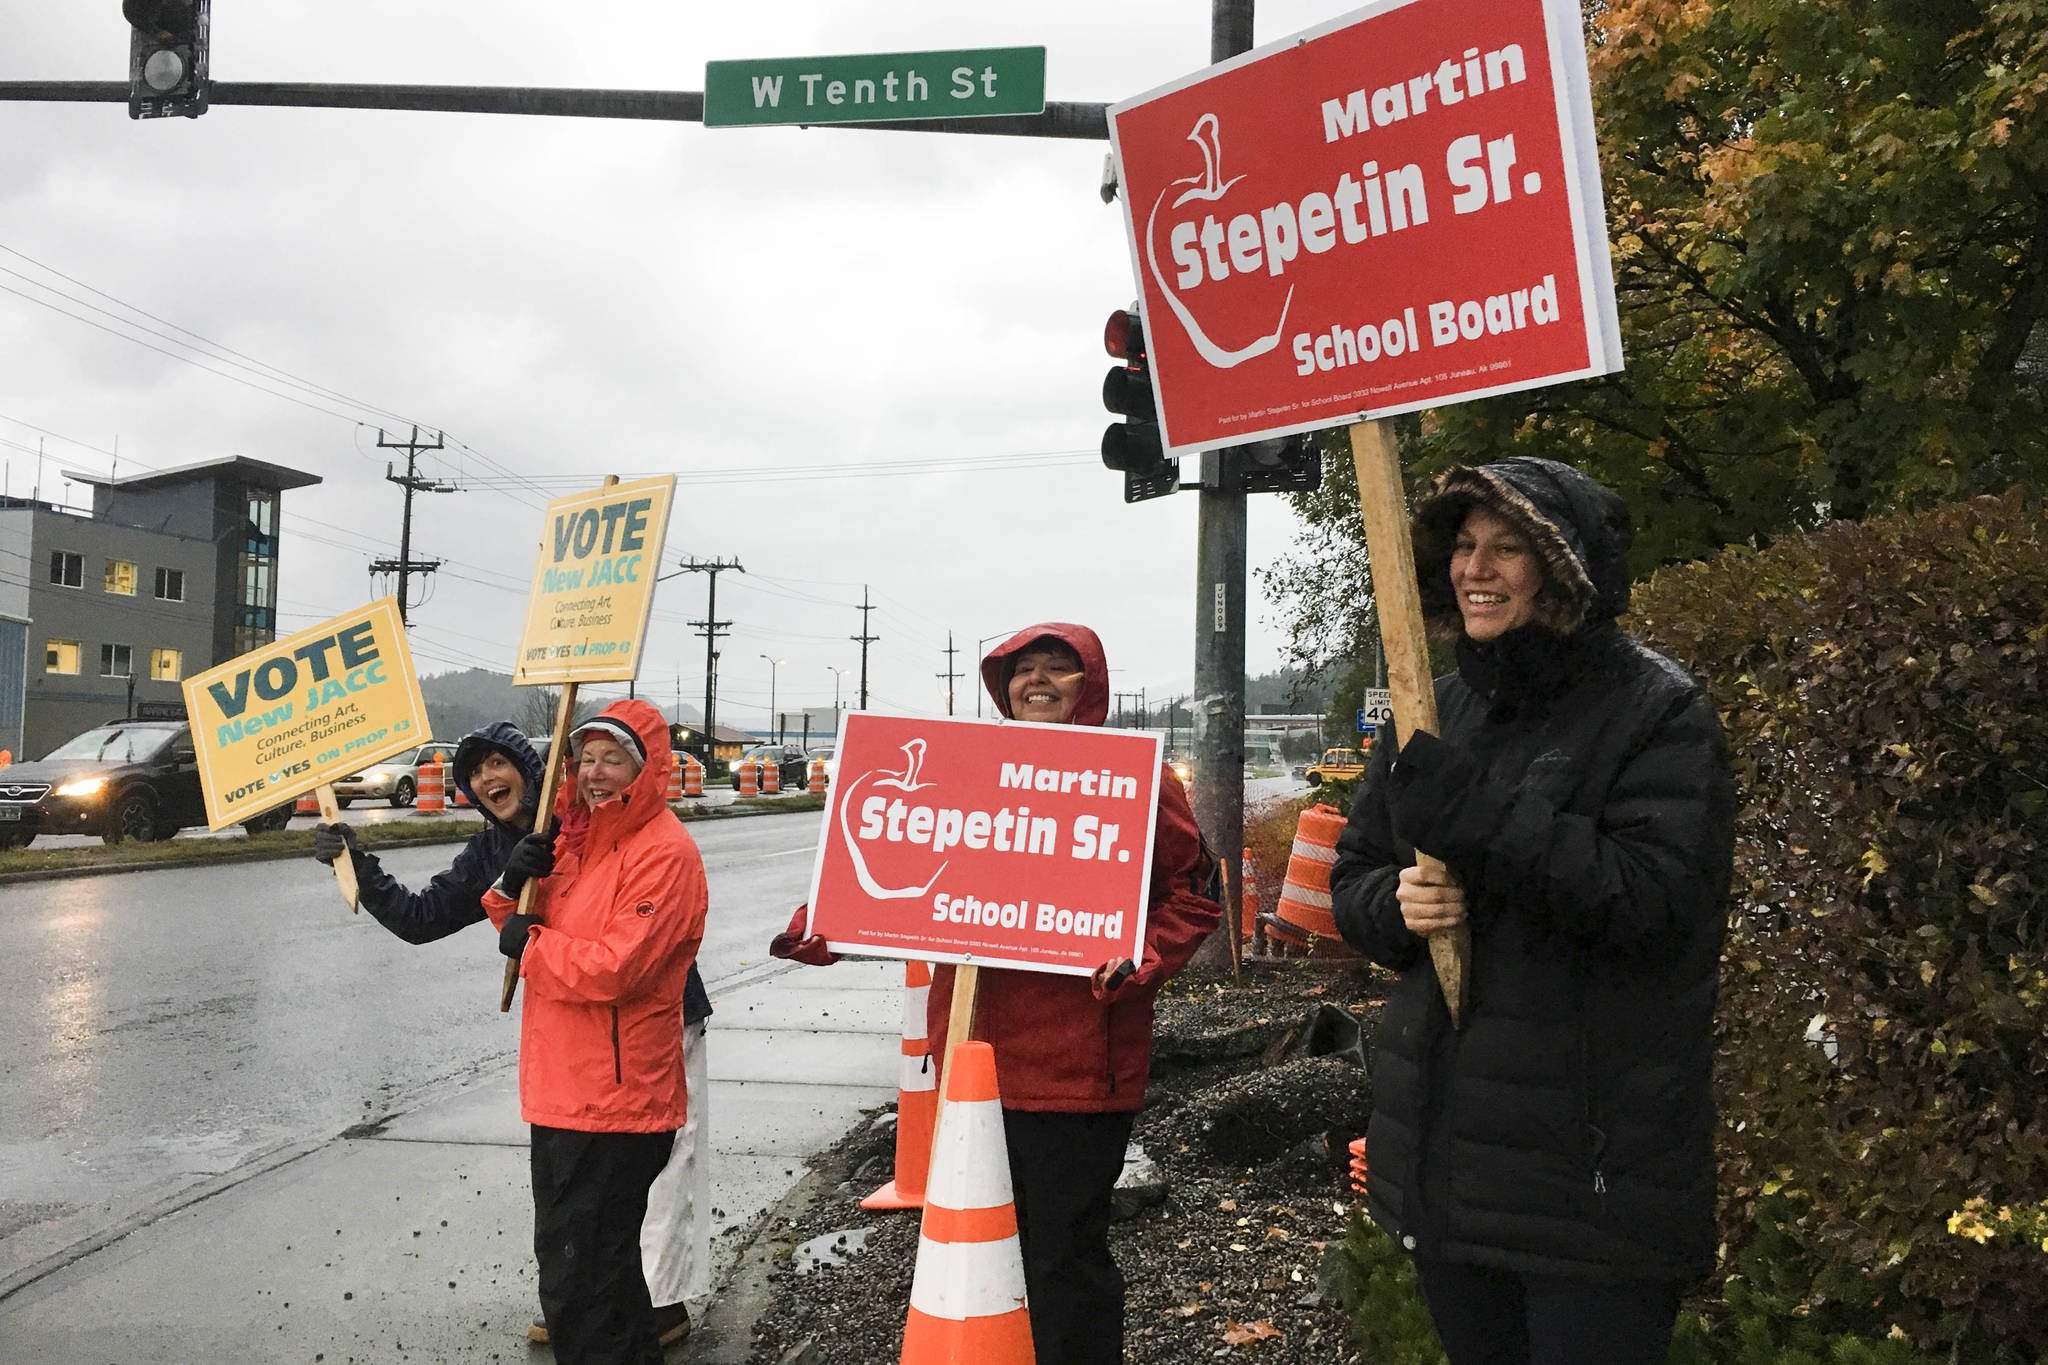 Supporters of Martin Stepetin Sr.’s bid for a seat on the school board and Proposition 3 wave signs in the intersection of Egan Drive and the Juneau-Douglas Bridge. Voting is from 7 a.m. to 8 p.m. on Tuesday, Oct. 1, 2019. (Michael S. Lockett | Juneau Empire)